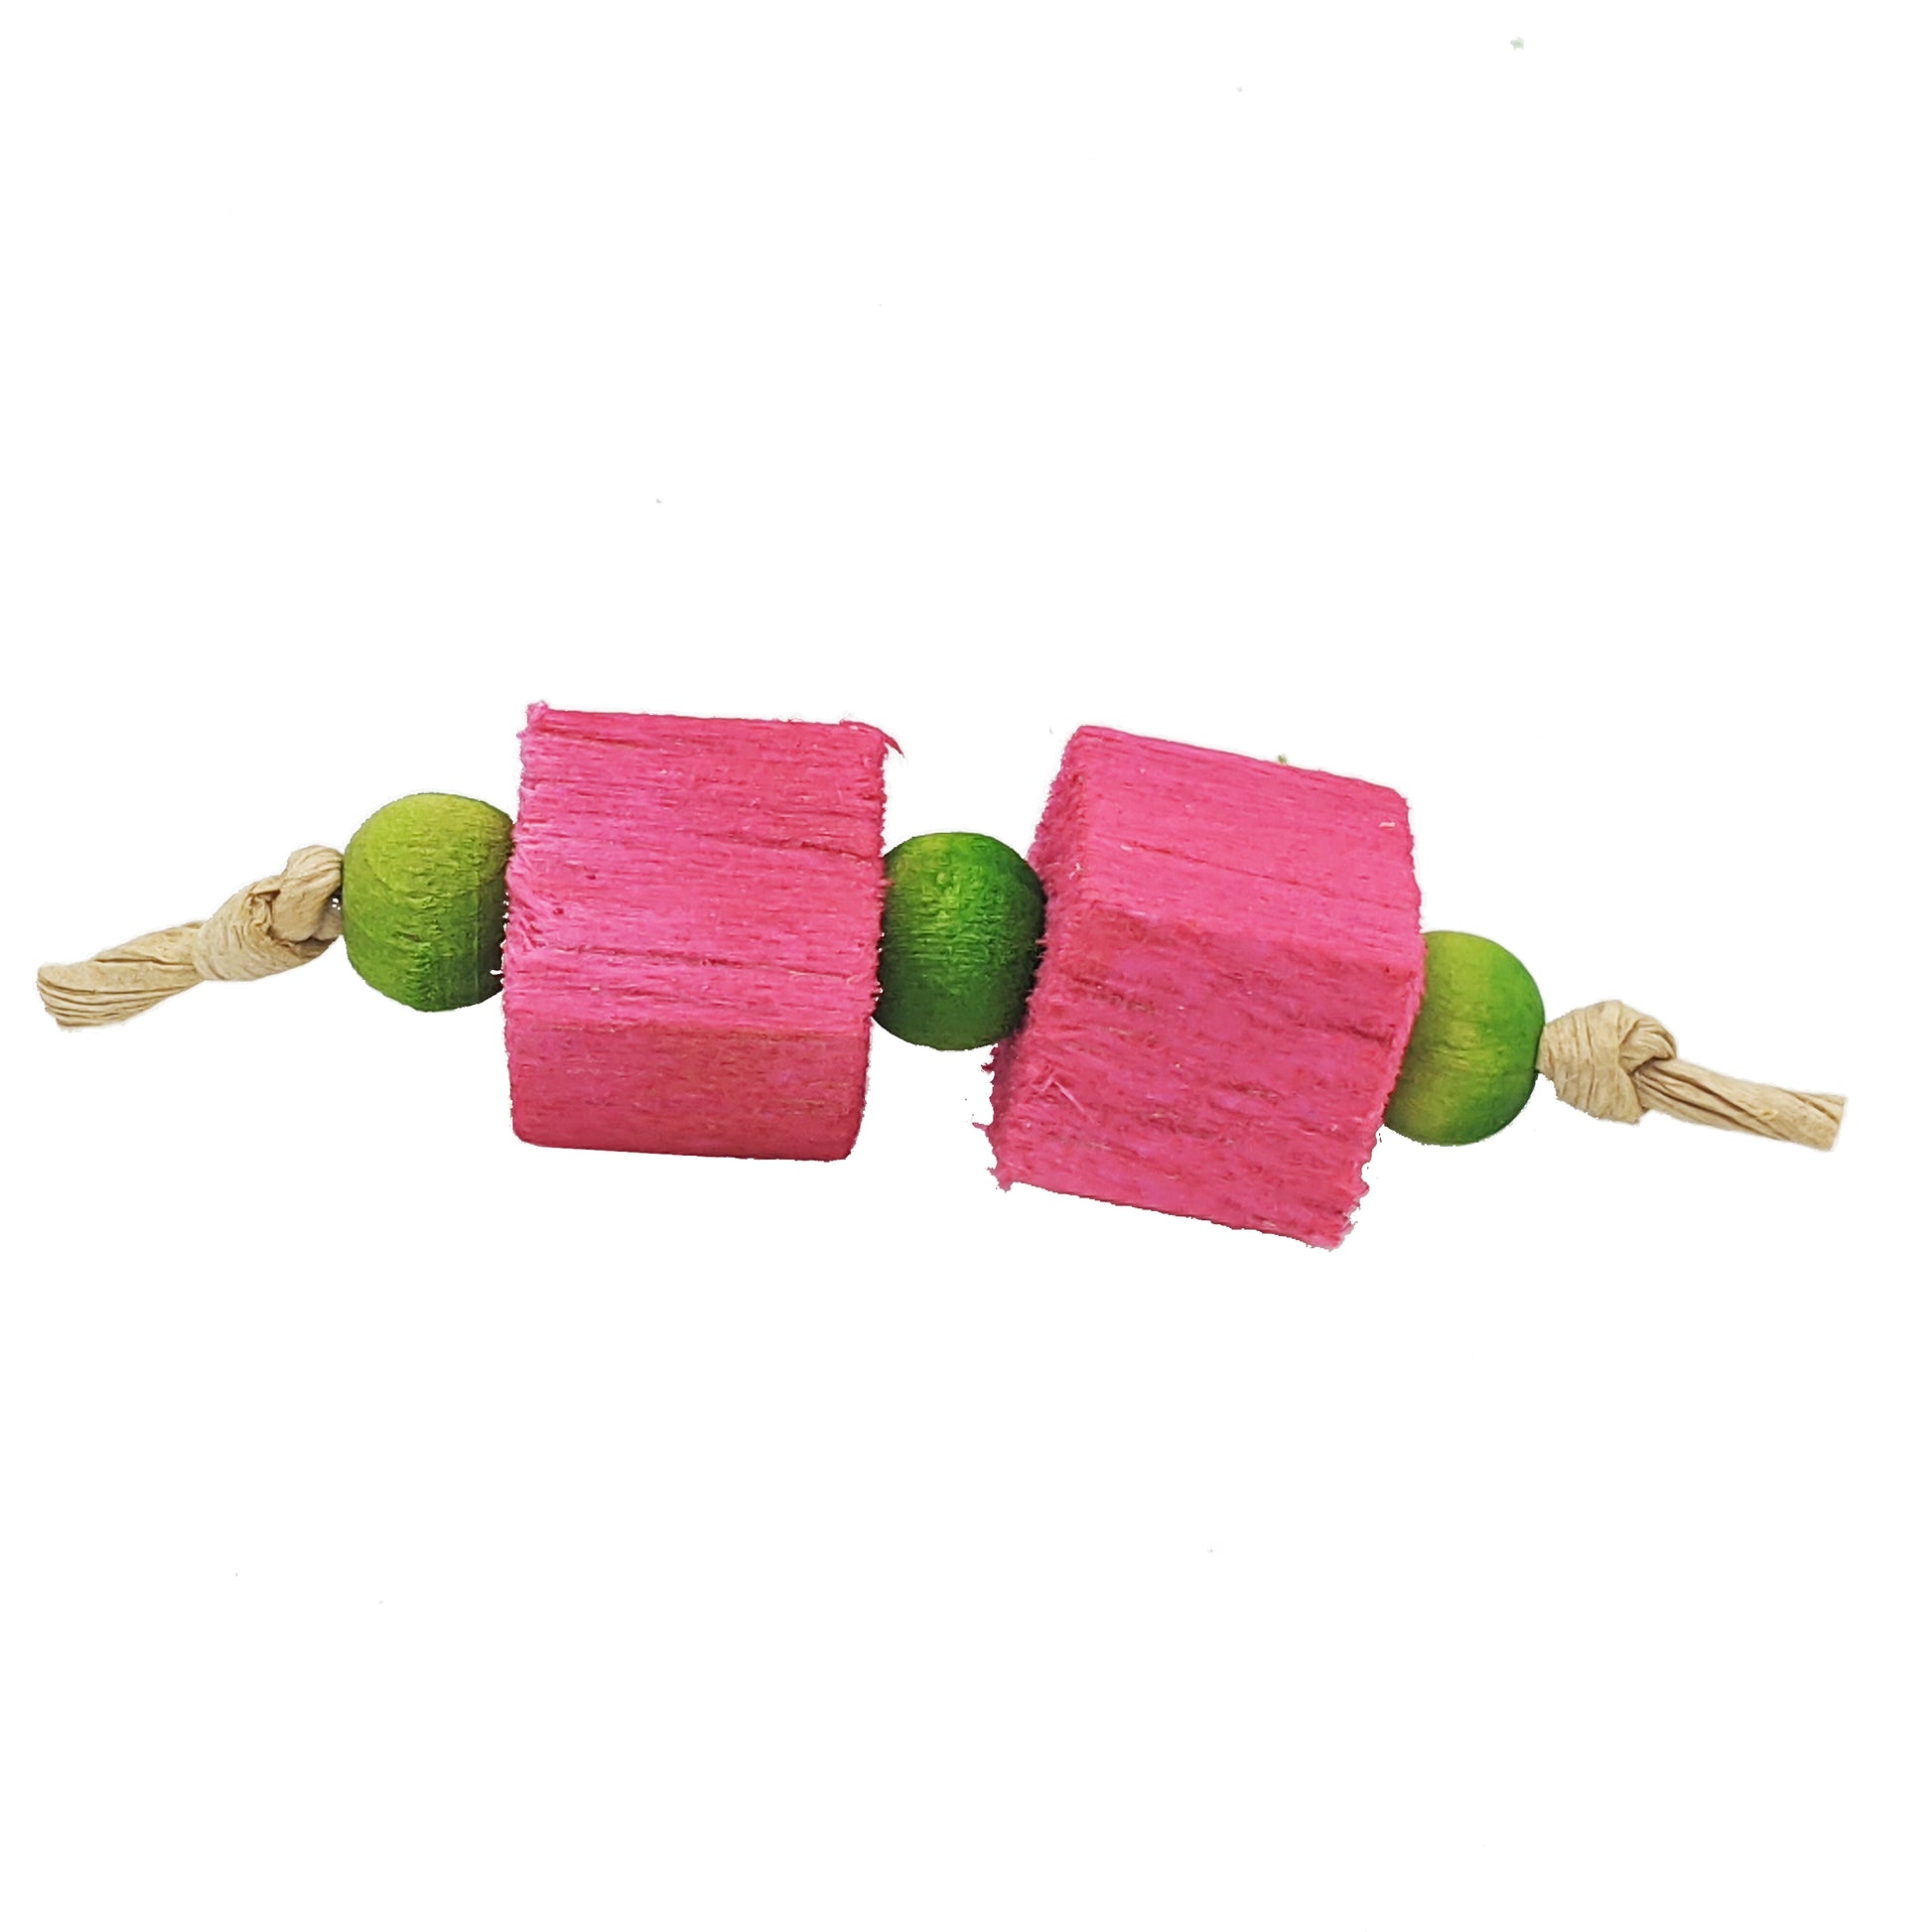 A small foot toy composed of three 8mm wood beads separated by two 1/2" balsa blocks. 